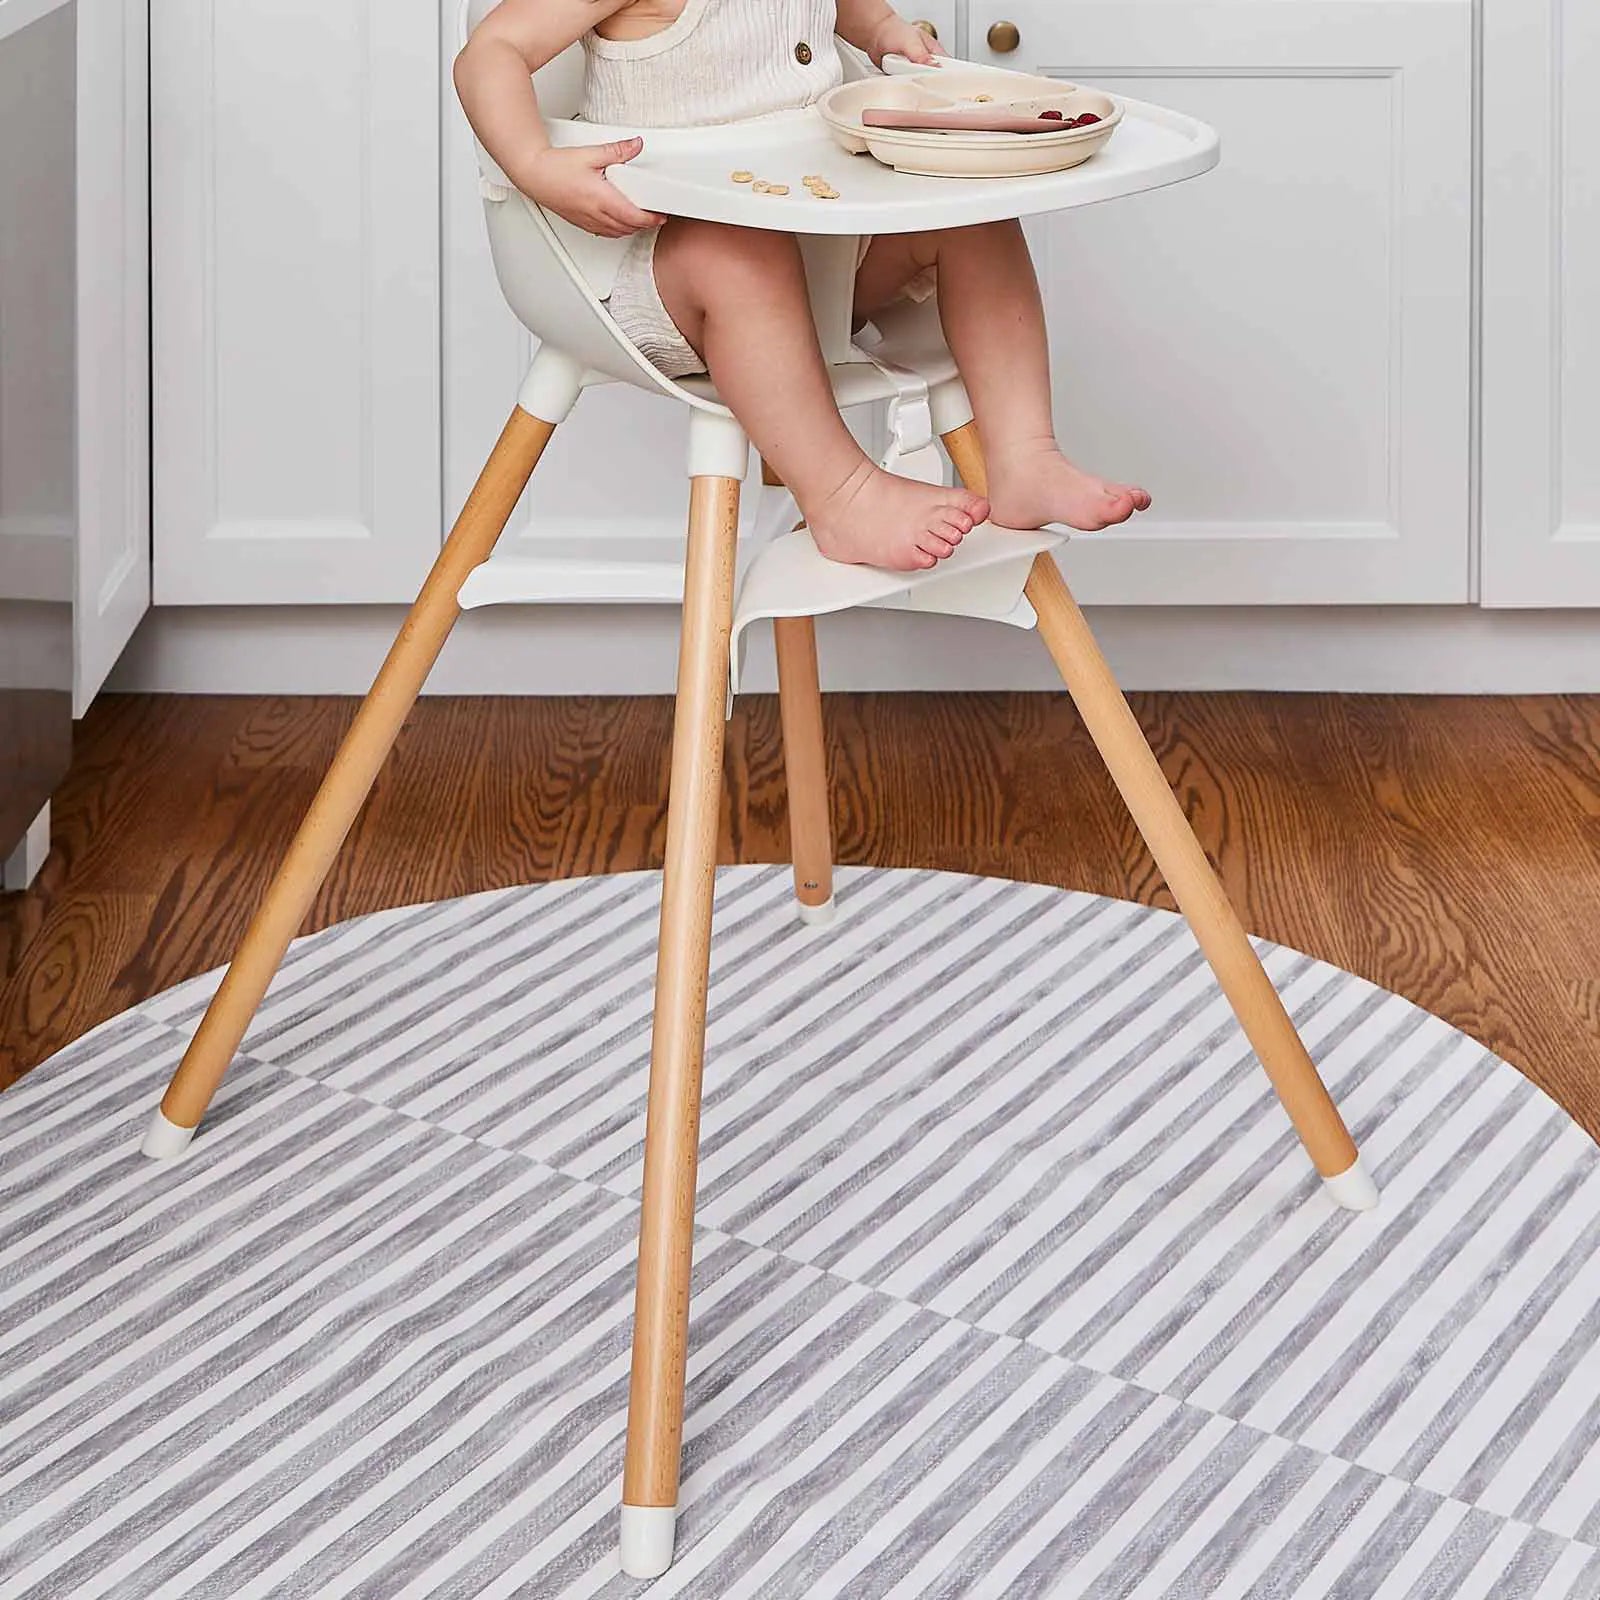 Reese pewter gray and white inverted stripe high chair mat shown in a kitchen under a highchair mat with toddler sitting in the chair eating